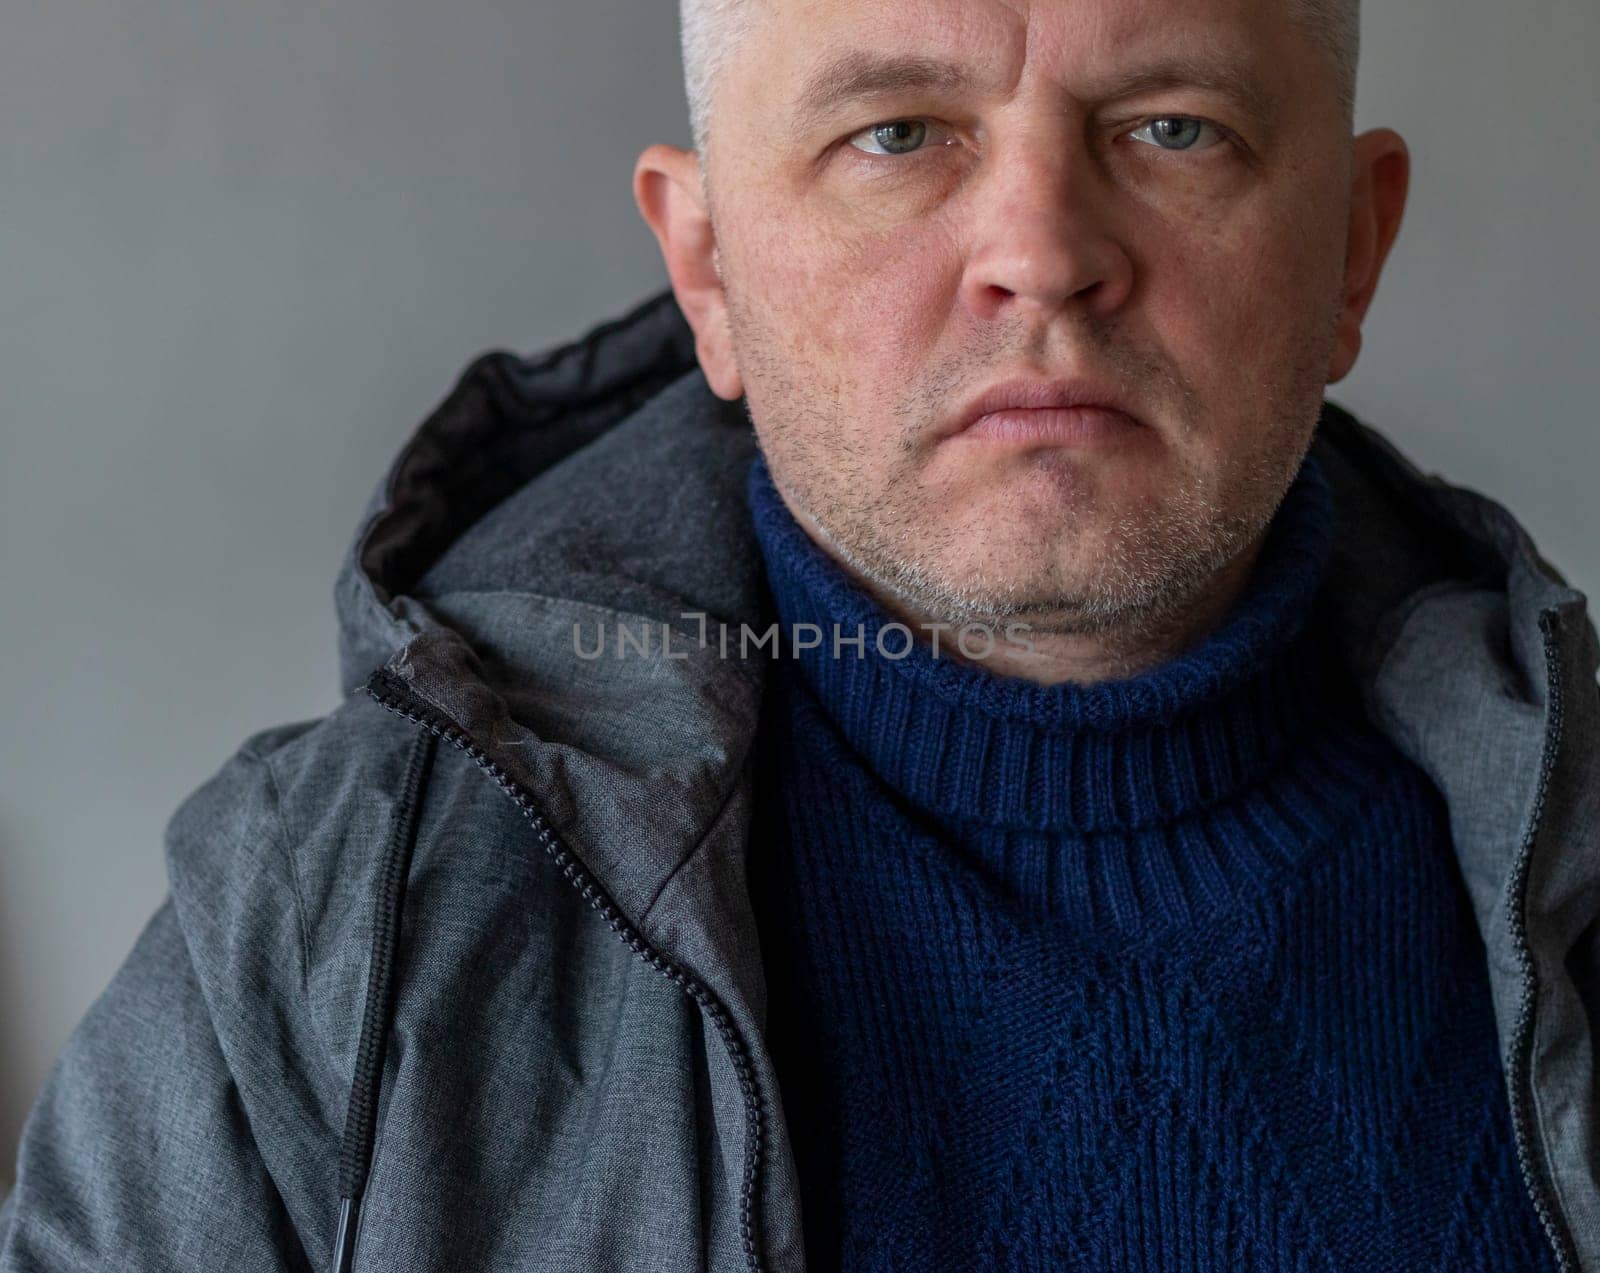 Portrait of the mid aged man with grey hair, wearing warm, dark blue sweater and grey coat.